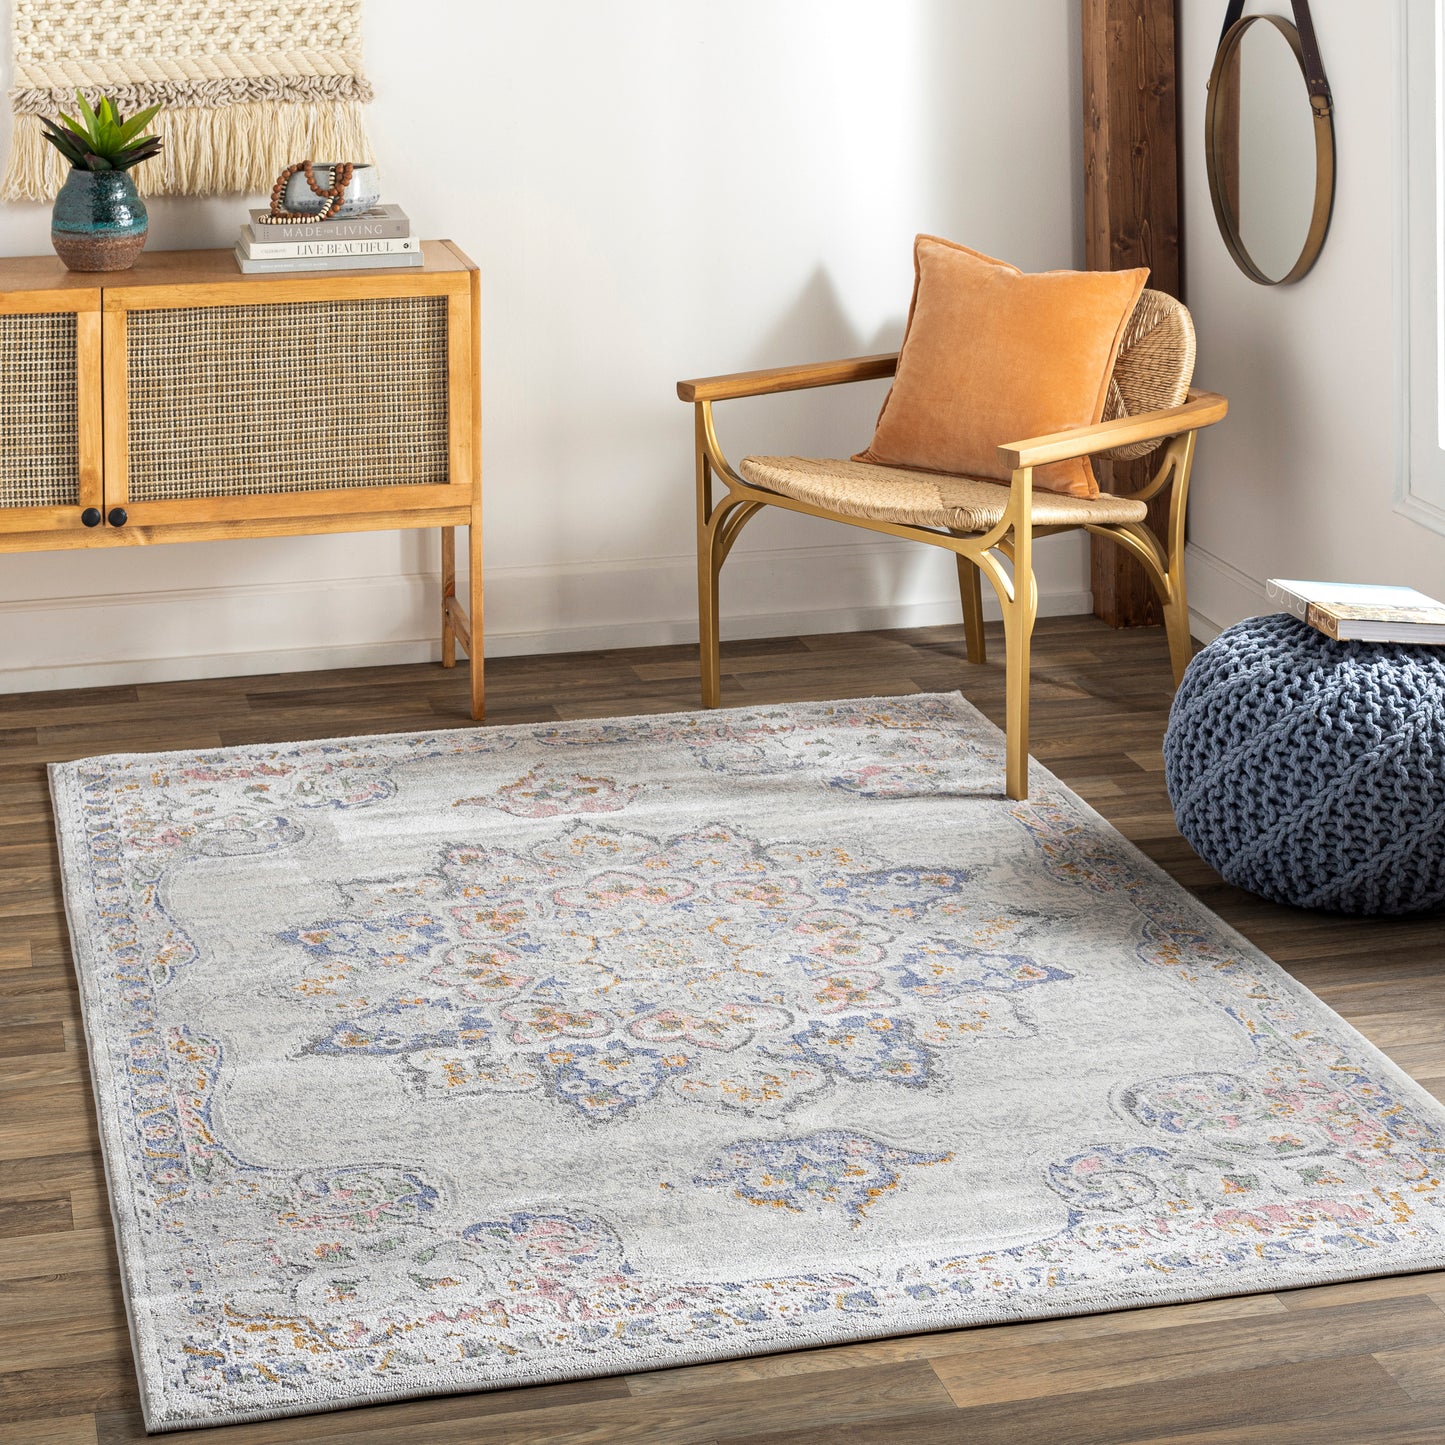 Lagos 29943 Machine Woven Synthetic Blend Indoor Area Rug by Surya Rugs